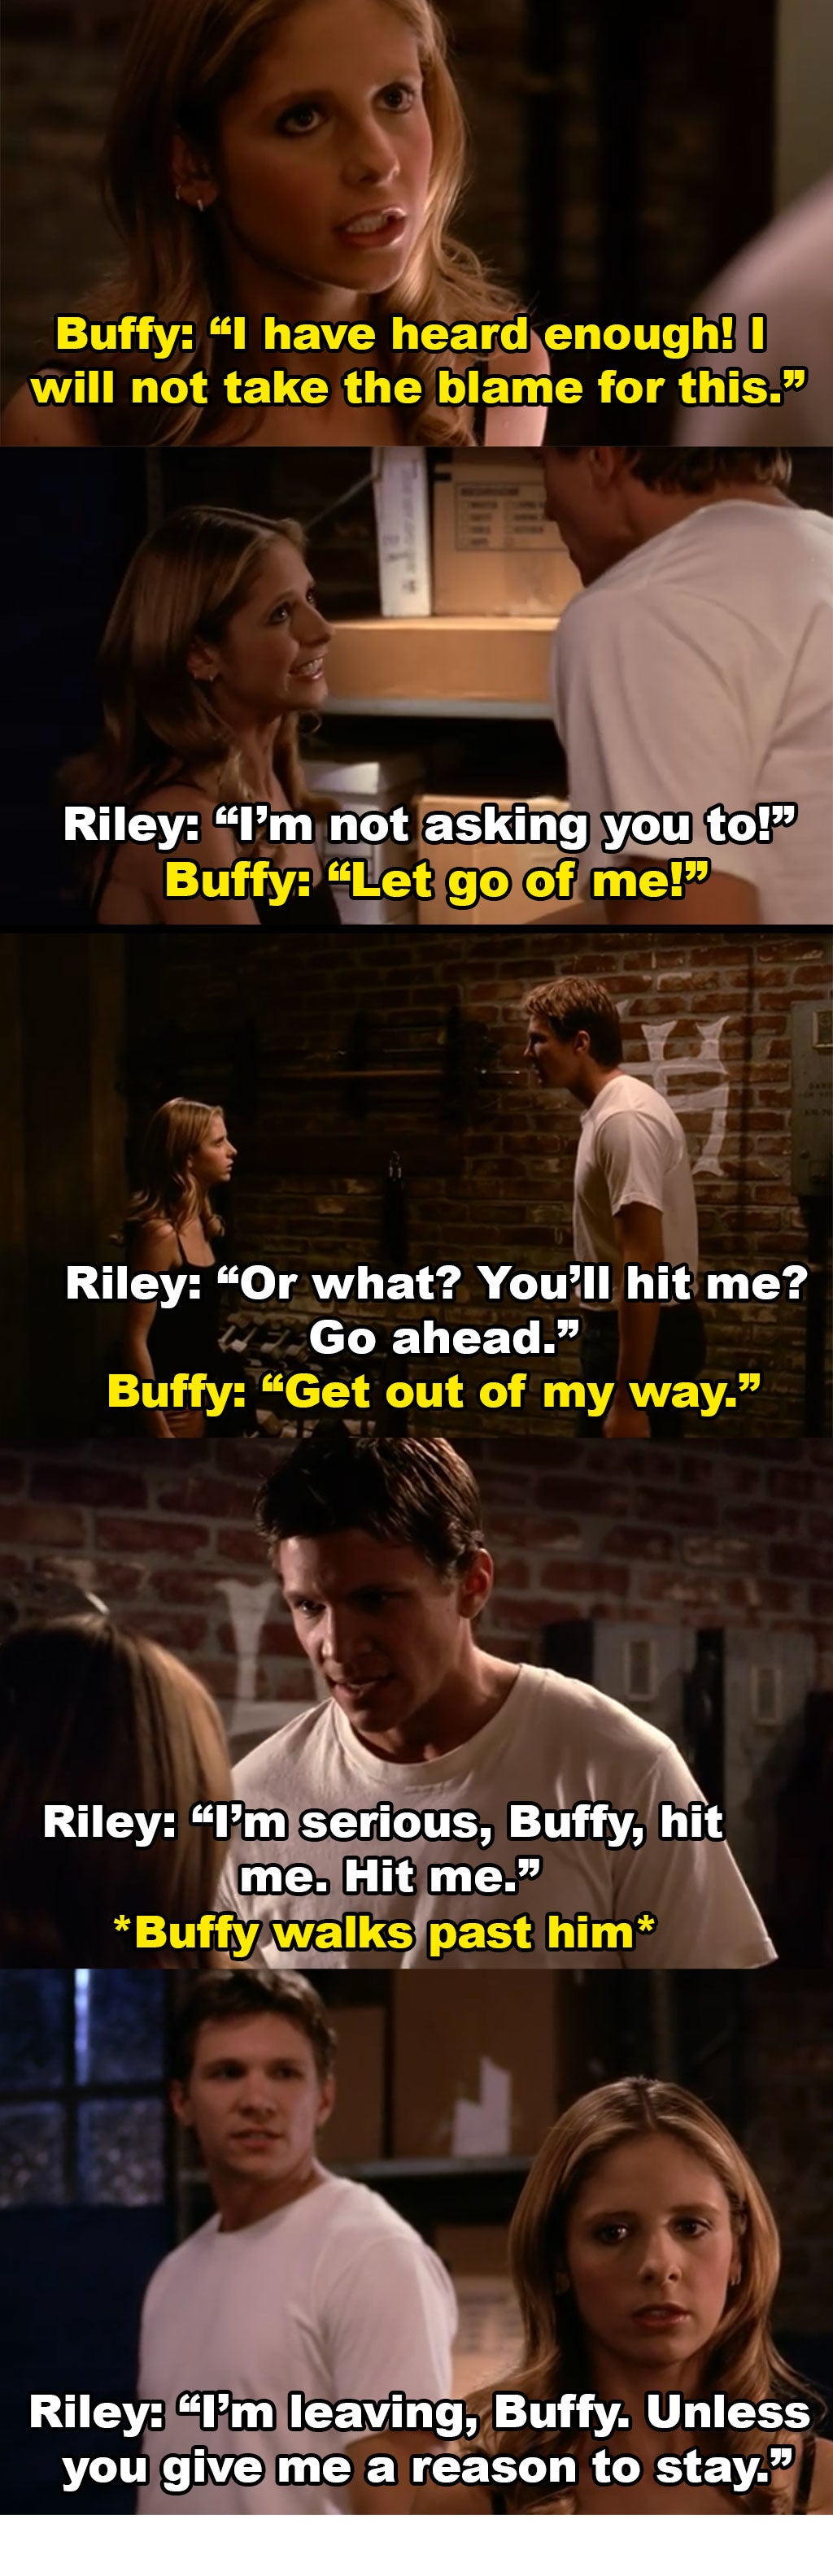 Buffy tries to leave and says she won&#x27;t take the blame for this. Riley grabs her and then asks her to hit him when she tries to get him to stop. She walks away and Riley tells her he&#x27;s leaving unless she gives him a reason to stay